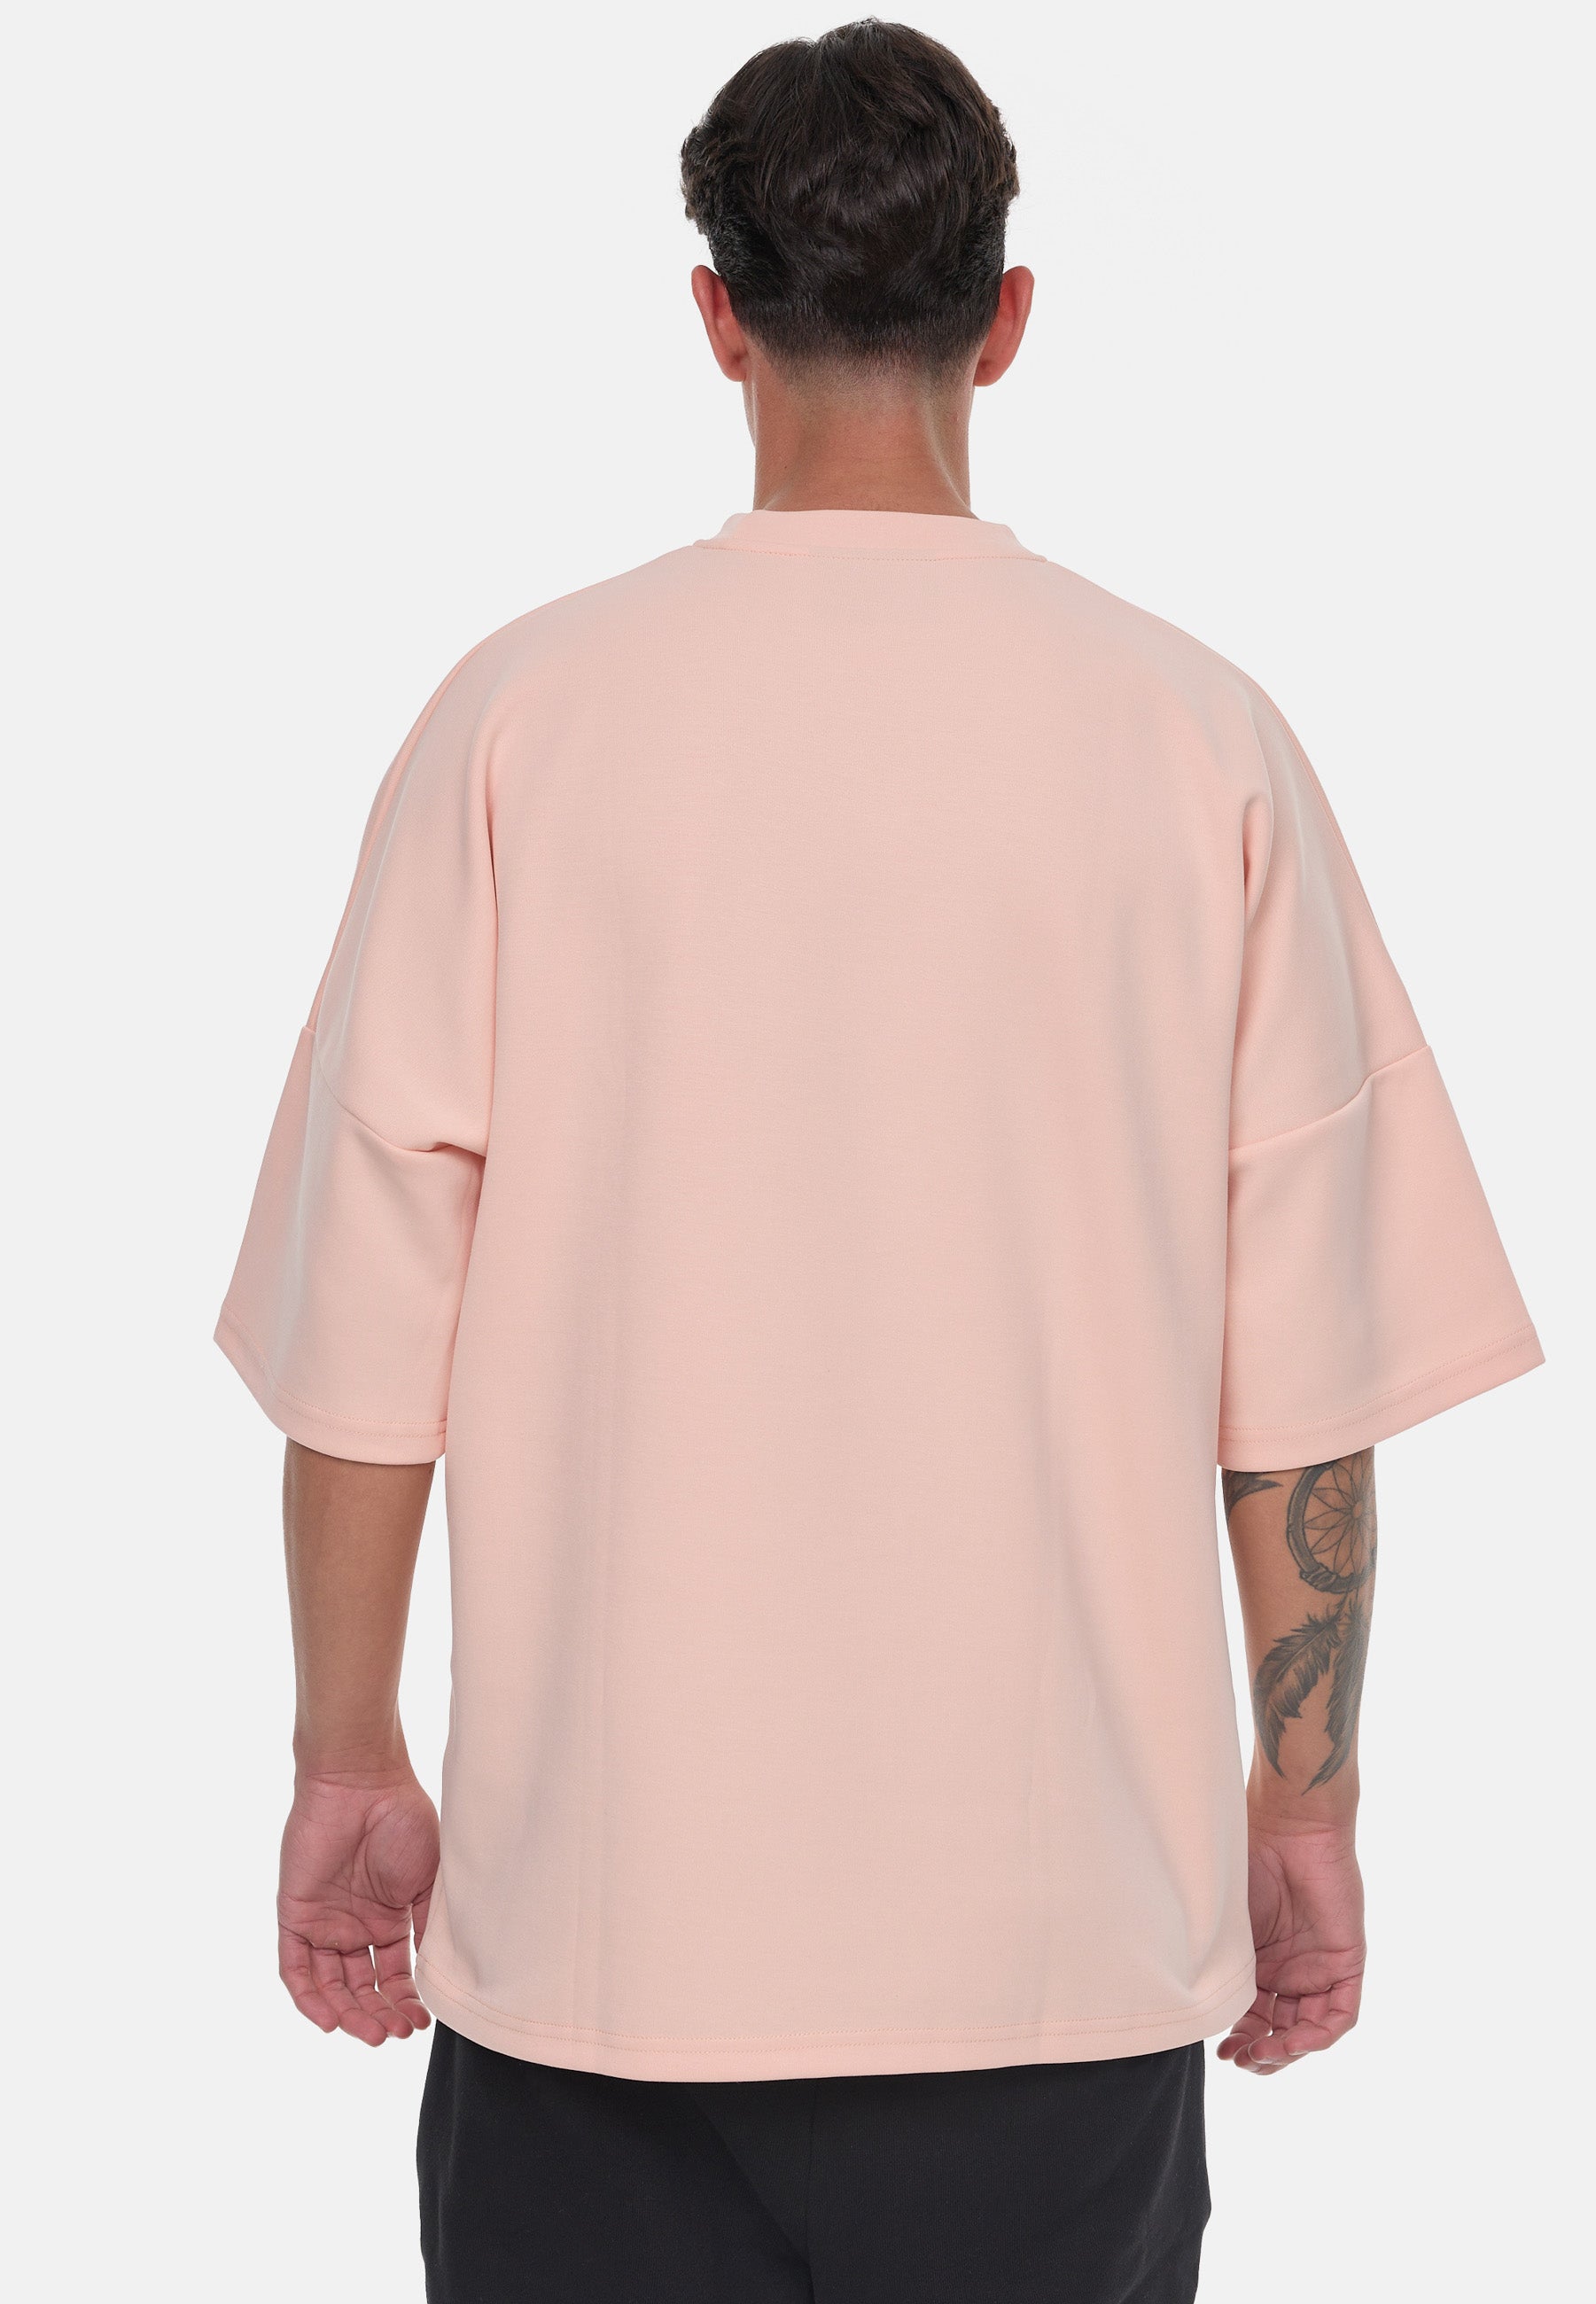 LUXAGER T-Shirt Oversize salmon – Luxager pink